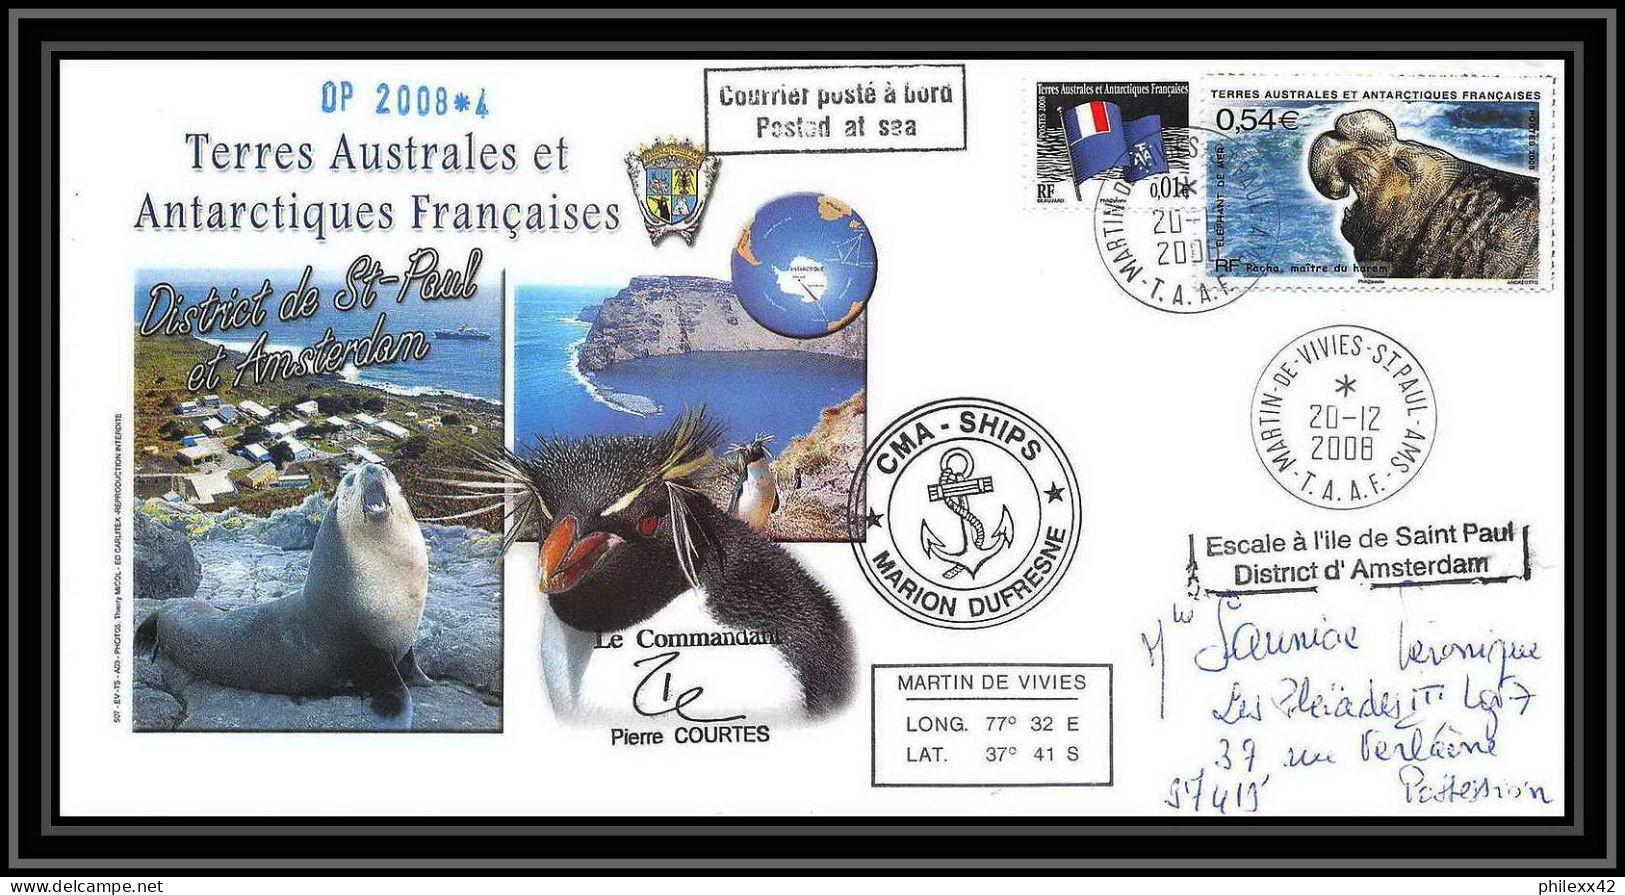 2871 Sea Elephant Terres Australes TAAF Helilagon Lettre Cover Dufresne Signé Signed Op 2008/4 St Paul 20/12/2008 N°511 - Helicópteros